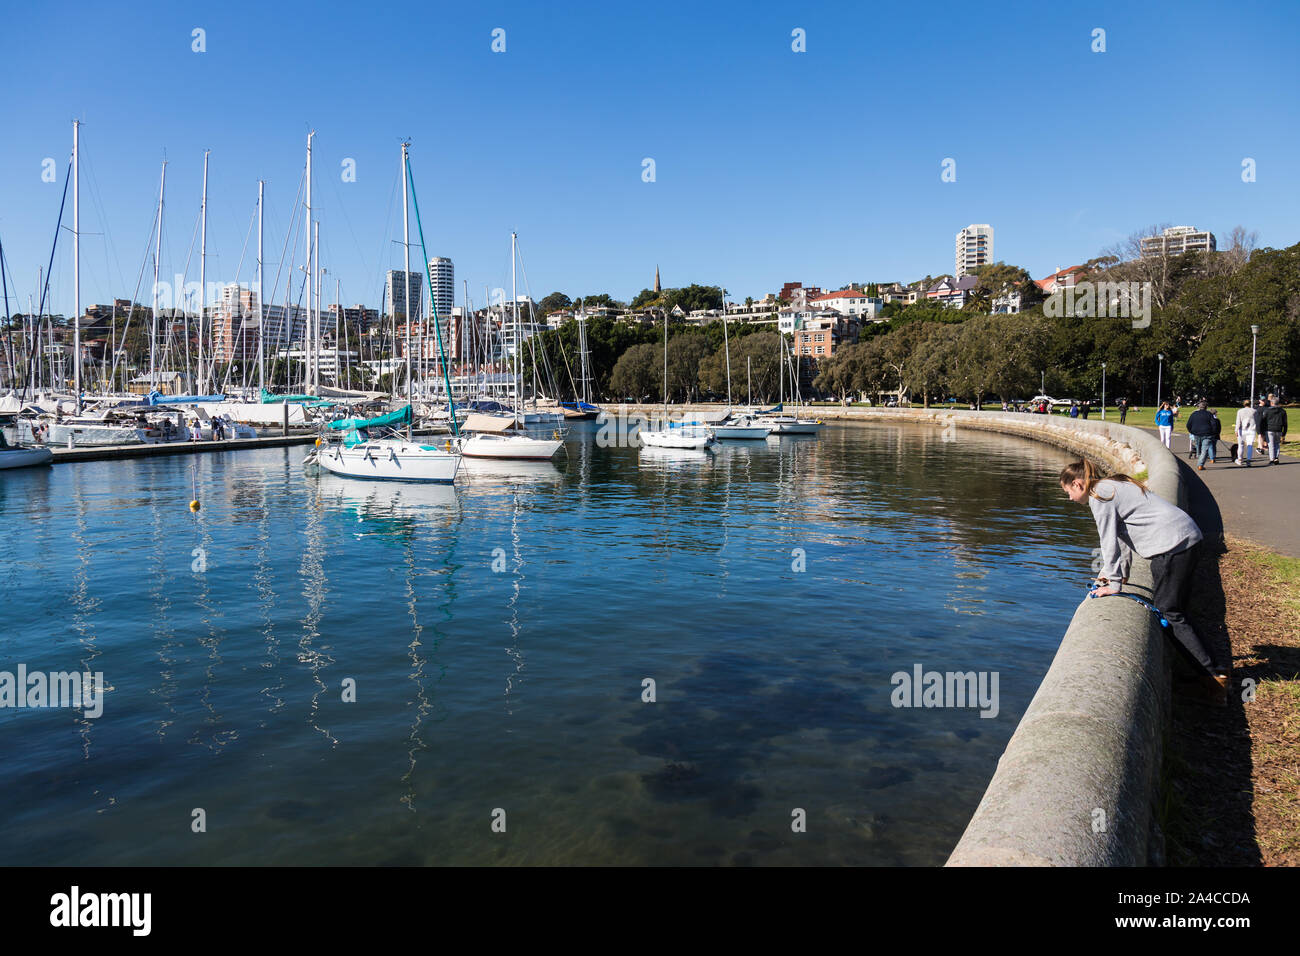 Views of Sydney Harbour from Rushcutters Bay Park, Sydney. A girl looks at the clear water. Stock Photo